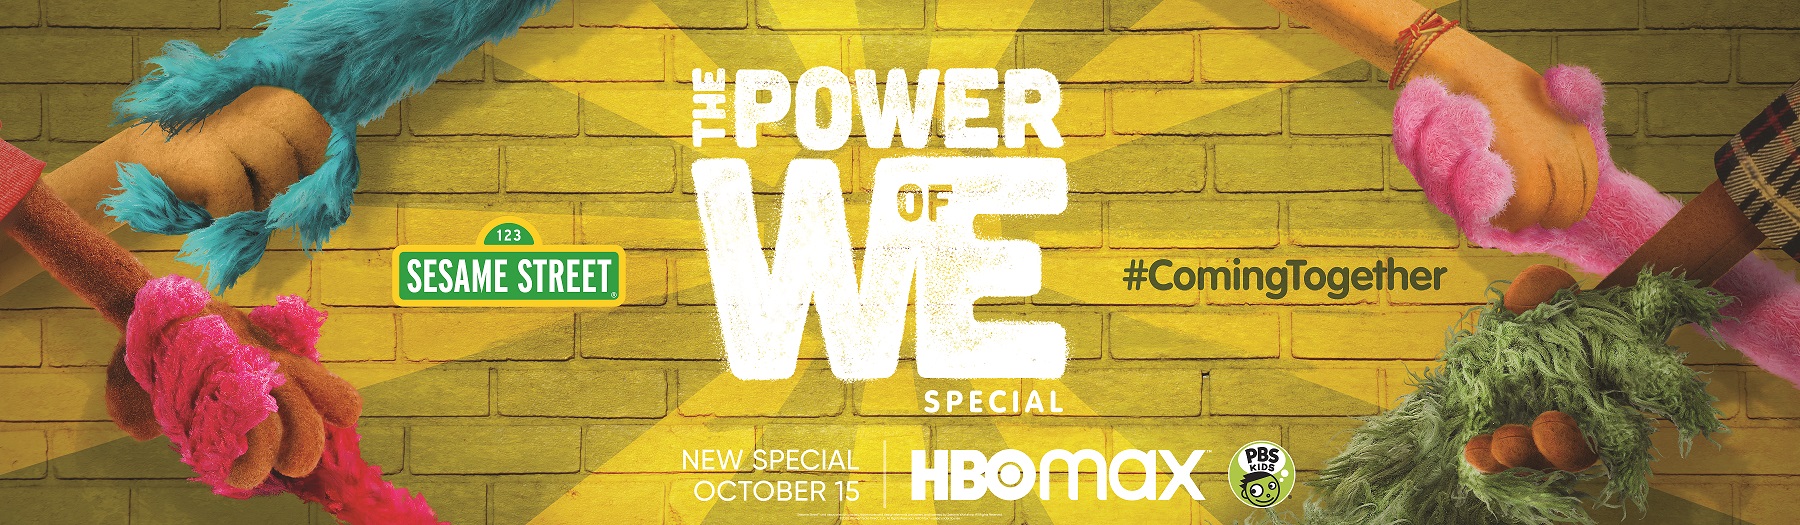 Furry muppet hands clasp one another against a yellow brick background. In the center of the image, it says "The Power of We Special". The Sesame Street logo appears to the left, #ComingTogether appears to the right, and at the bottom it says "New Special October 15" beside the HBO Max logo and PBS KIDS logo.